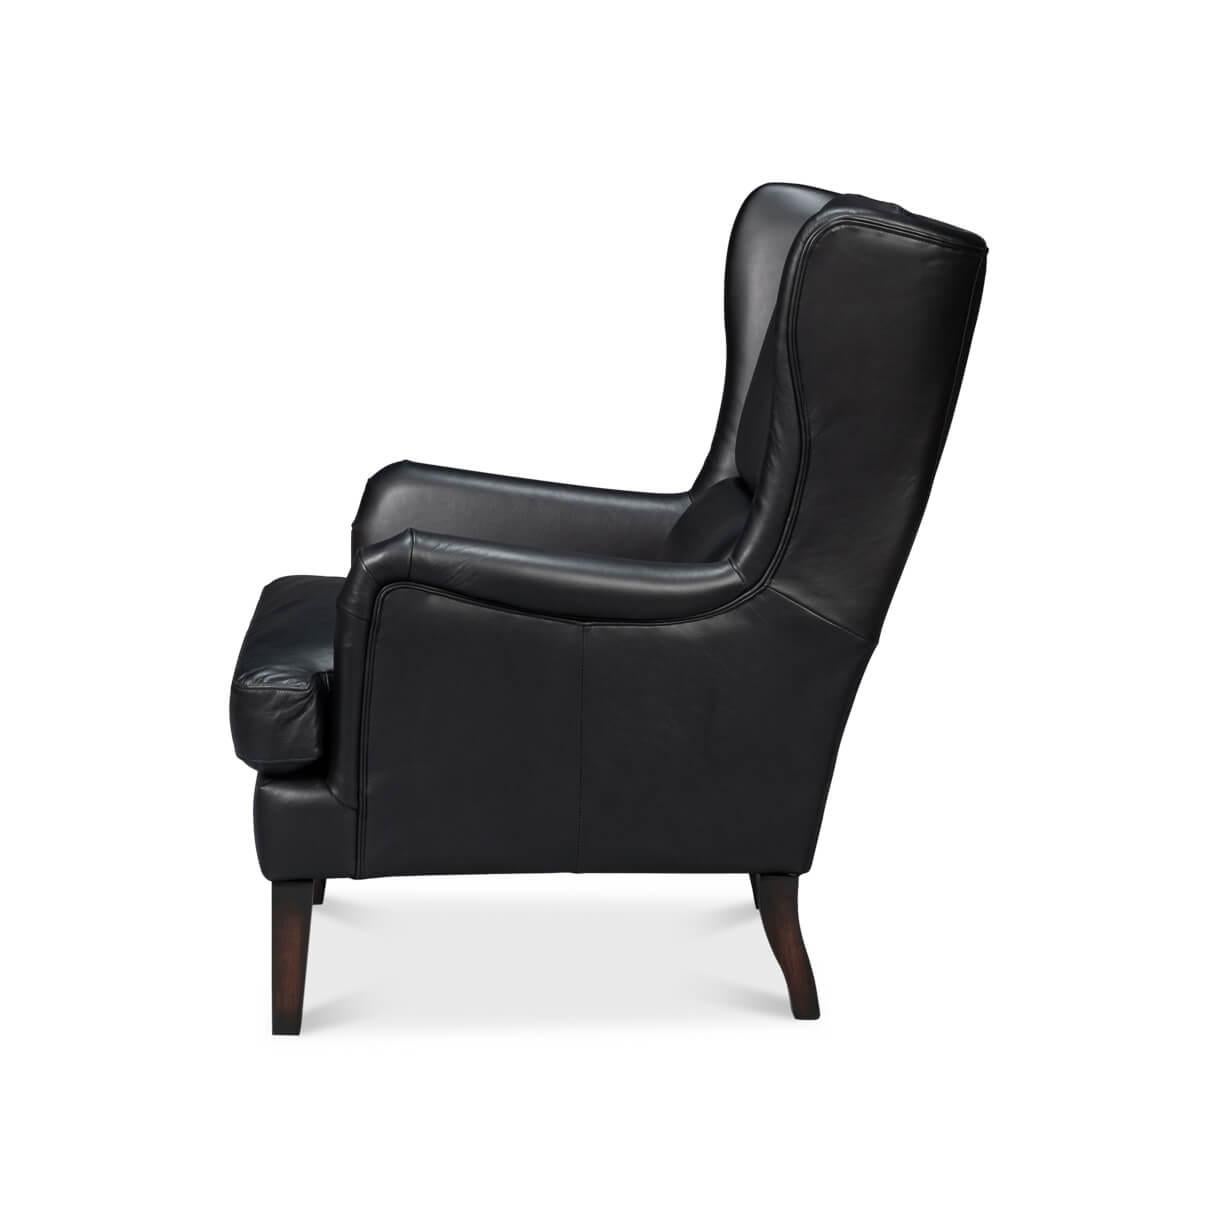 American Classical Classic Wingback Black Leather Chair For Sale